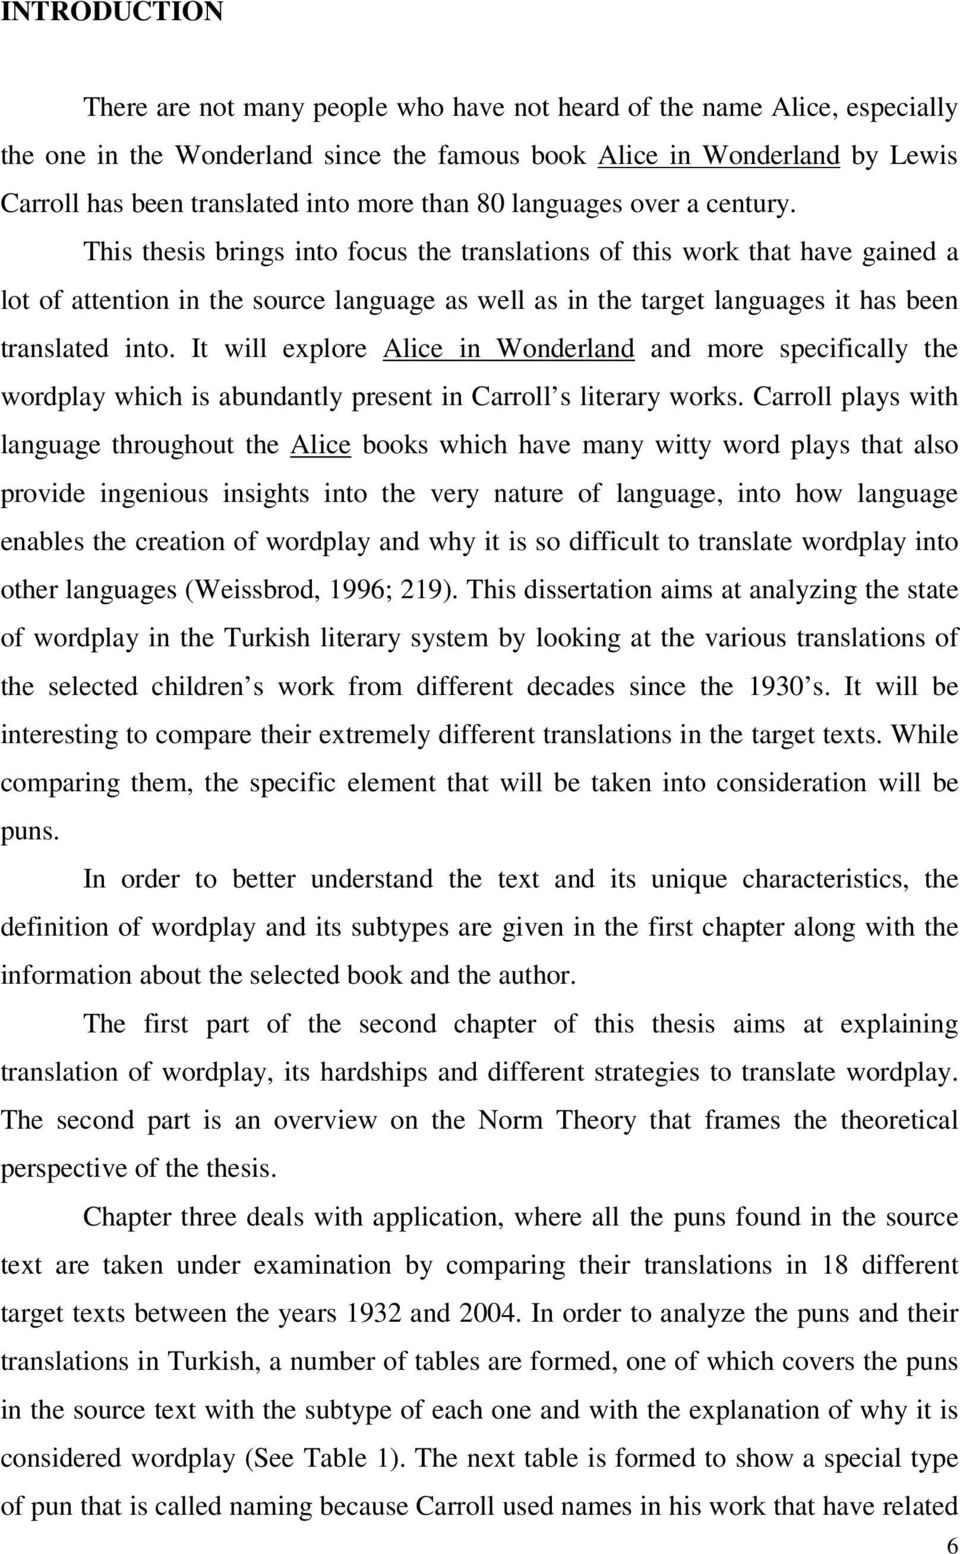 This thesis brings into focus the translations of this work that have gained a lot of attention in the source language as well as in the target languages it has been translated into.